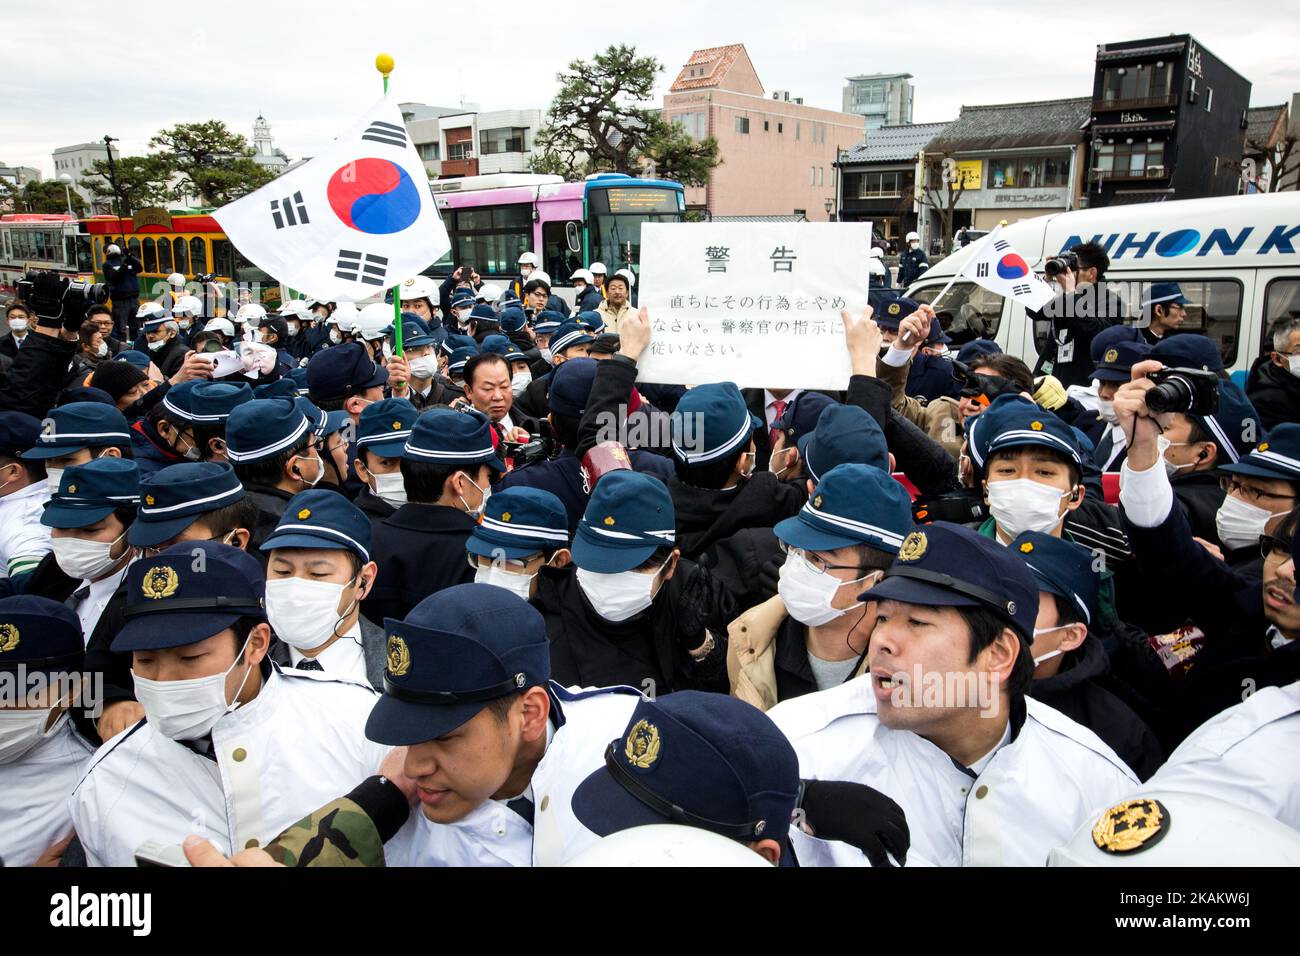 Korean nationalist clash with Japanese nationalists prior to the ceremony of Takeshima Day, a small disputed island controlled by South Korea which it calls Dokdo and Japan calls Takeshima, in Matsue in Shimane Prefecture, western Japan on Feb. 22, 2017. Japan urged South Korea to return disputed islets, The sovereignty issue over the islands has been the subject of a long territorial dispute between South Korean and Japan. (Photo by Richard Atrero de Guzman/NurPhoto) *** Please Use Credit from Credit Field *** Stock Photo